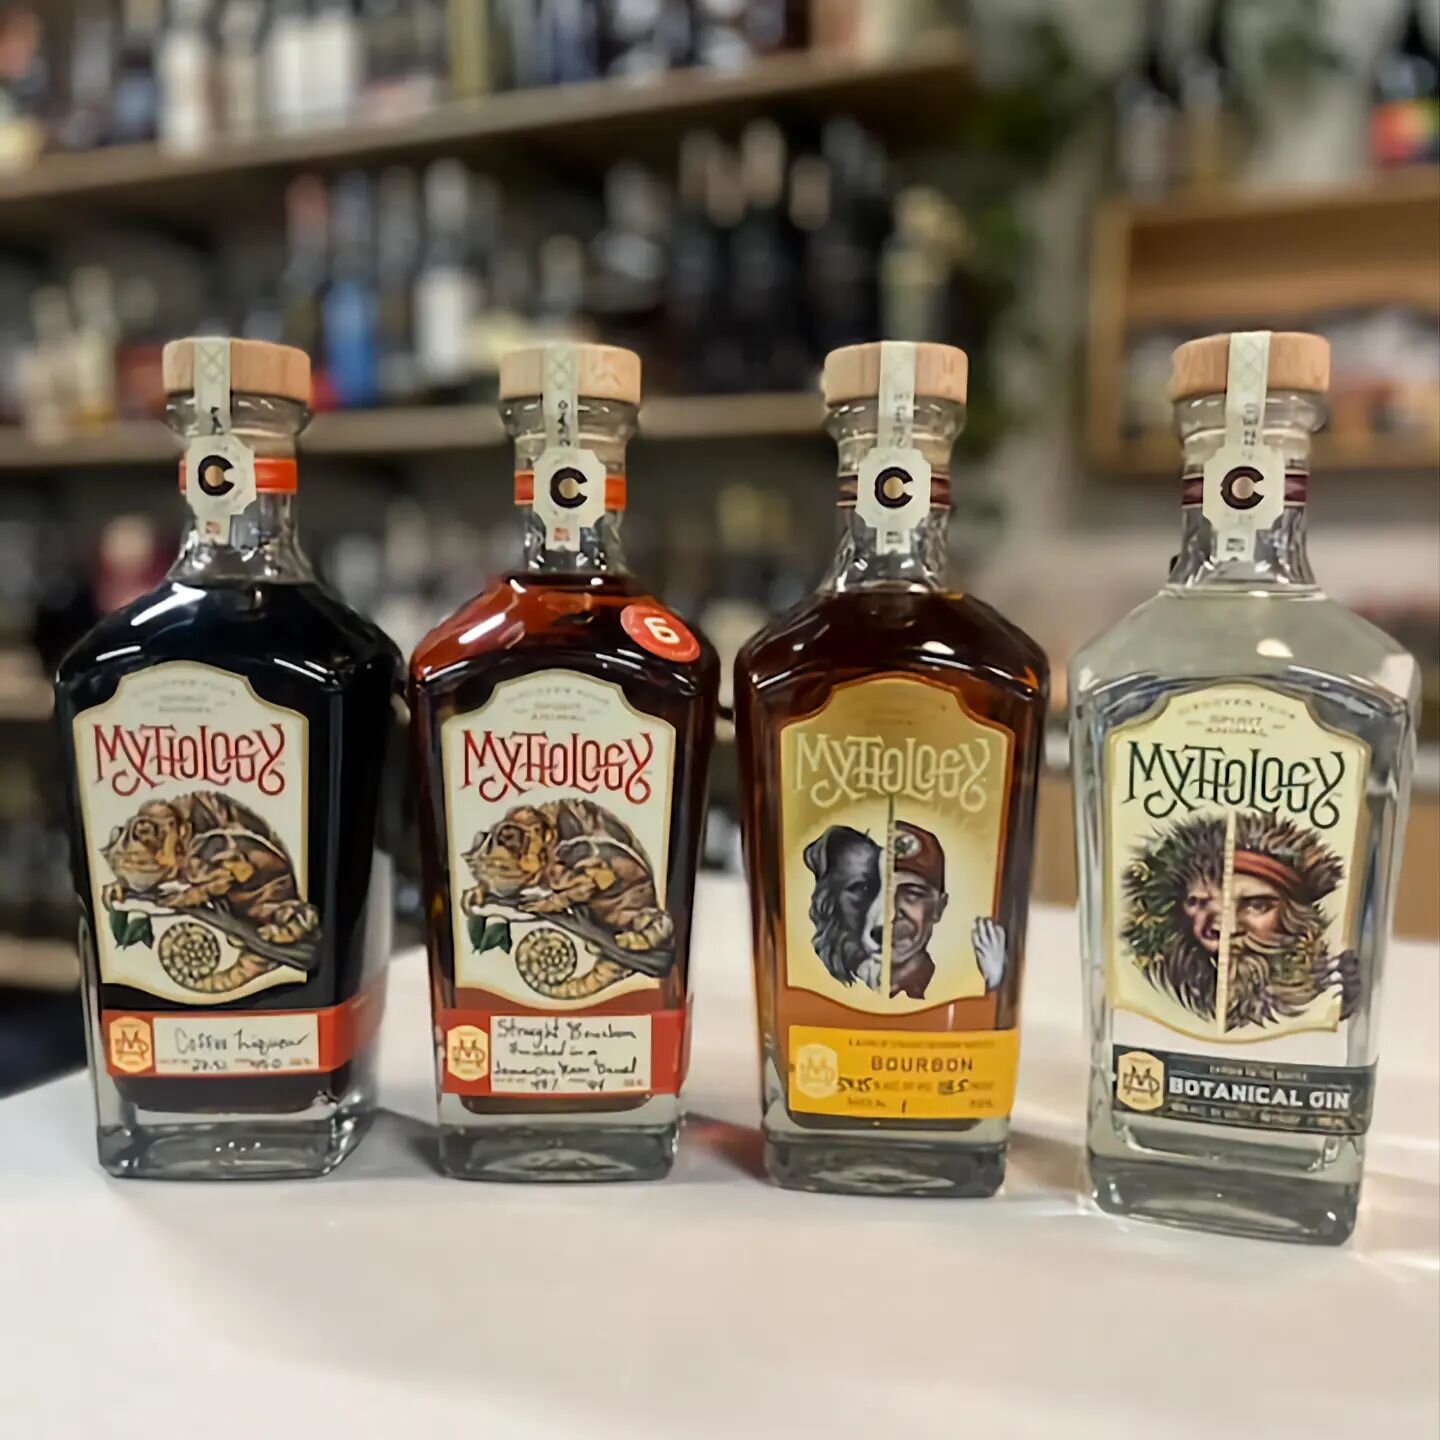 Anyone looking for Friday night plans? 👀
___________________________

Mythology Distillery is here tonight from 4-6 pouring some of the best from their spirits collection, such as  their Jamaican rum barrel finished Bourbon and a delectable Botanica